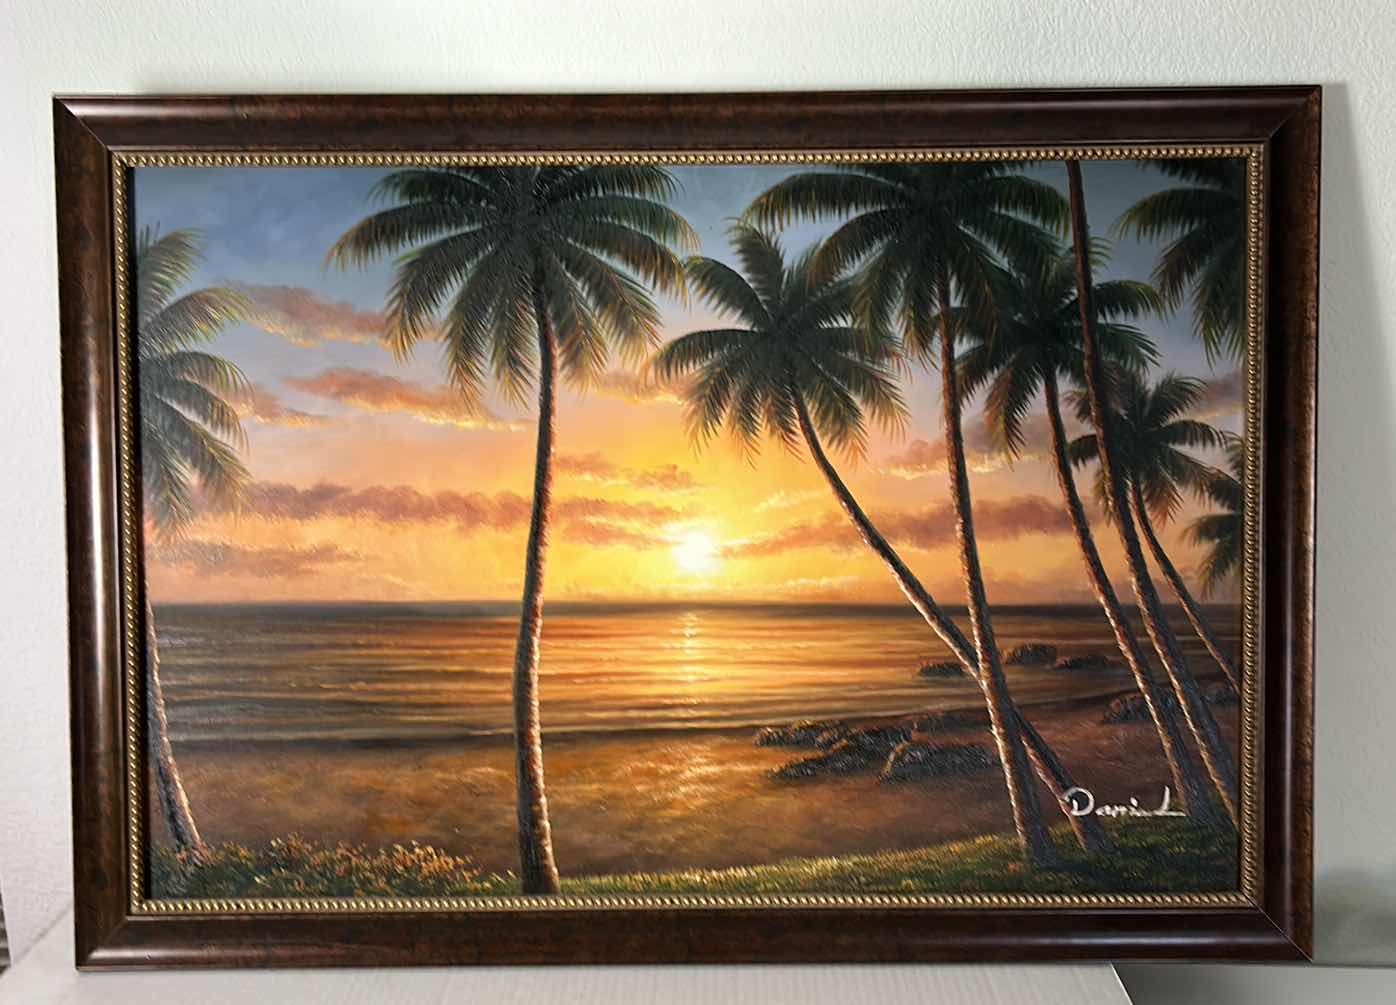 Photo 1 of SIGNED OIL ON CANVAS, PALM TREES, FRAMED ARTWORK 40“ x 28 1/2“